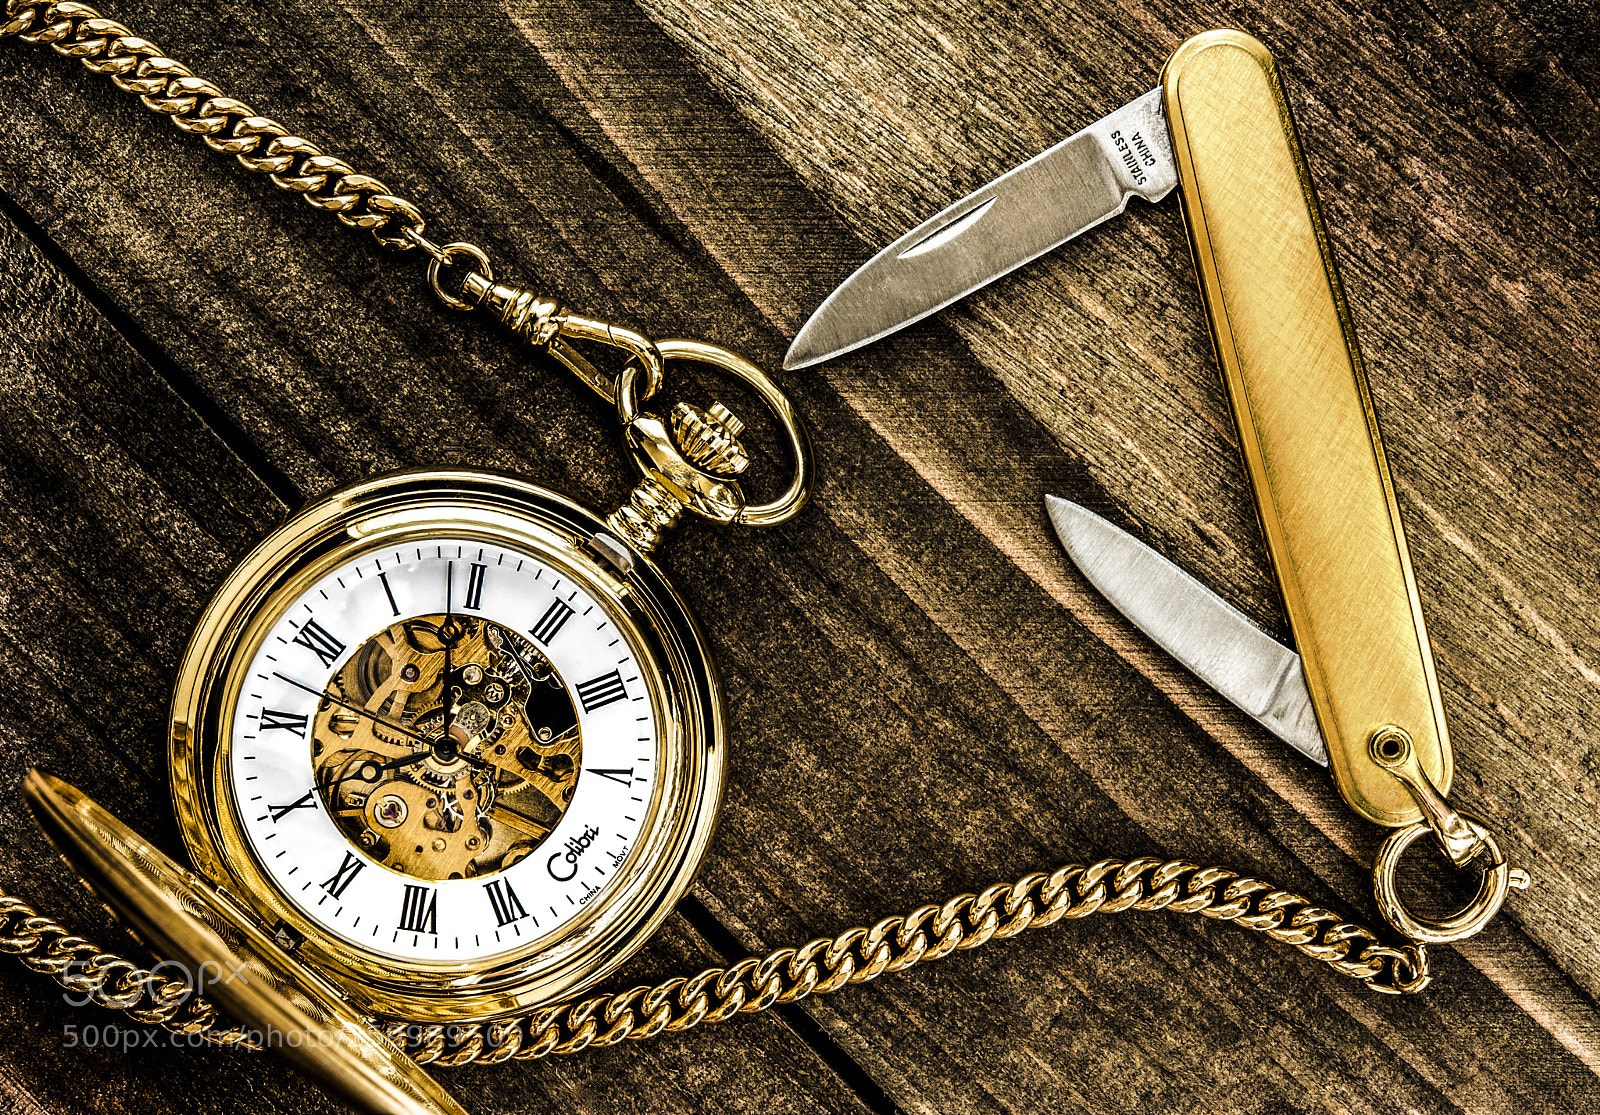 Nikon D700 sample photo. Pocket watch blade with photography